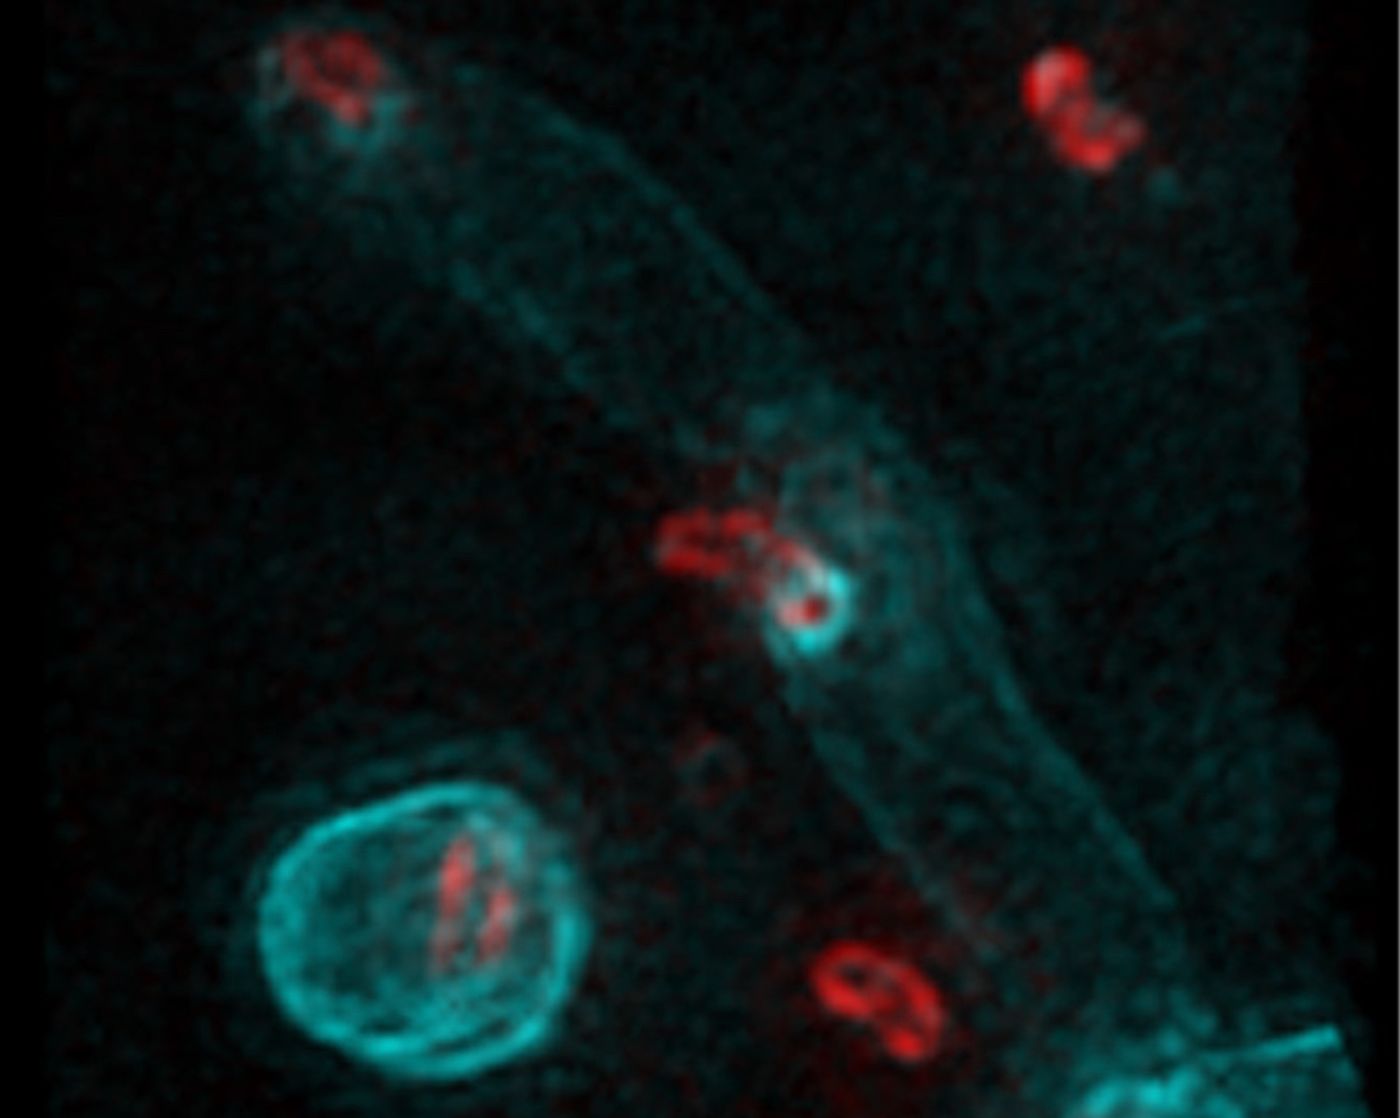 Three-dimensional structured illumination microscopy images of early predation by B. bacteriovorus (pre-labelled with BADA, false-coloured red) on prey E. coli cells after pulse labelling for 10 min with HADA (false-coloured cyan) to show early modification of cell walls. / Credit: University of Nottingham/Kuru et al Nature Microbiology